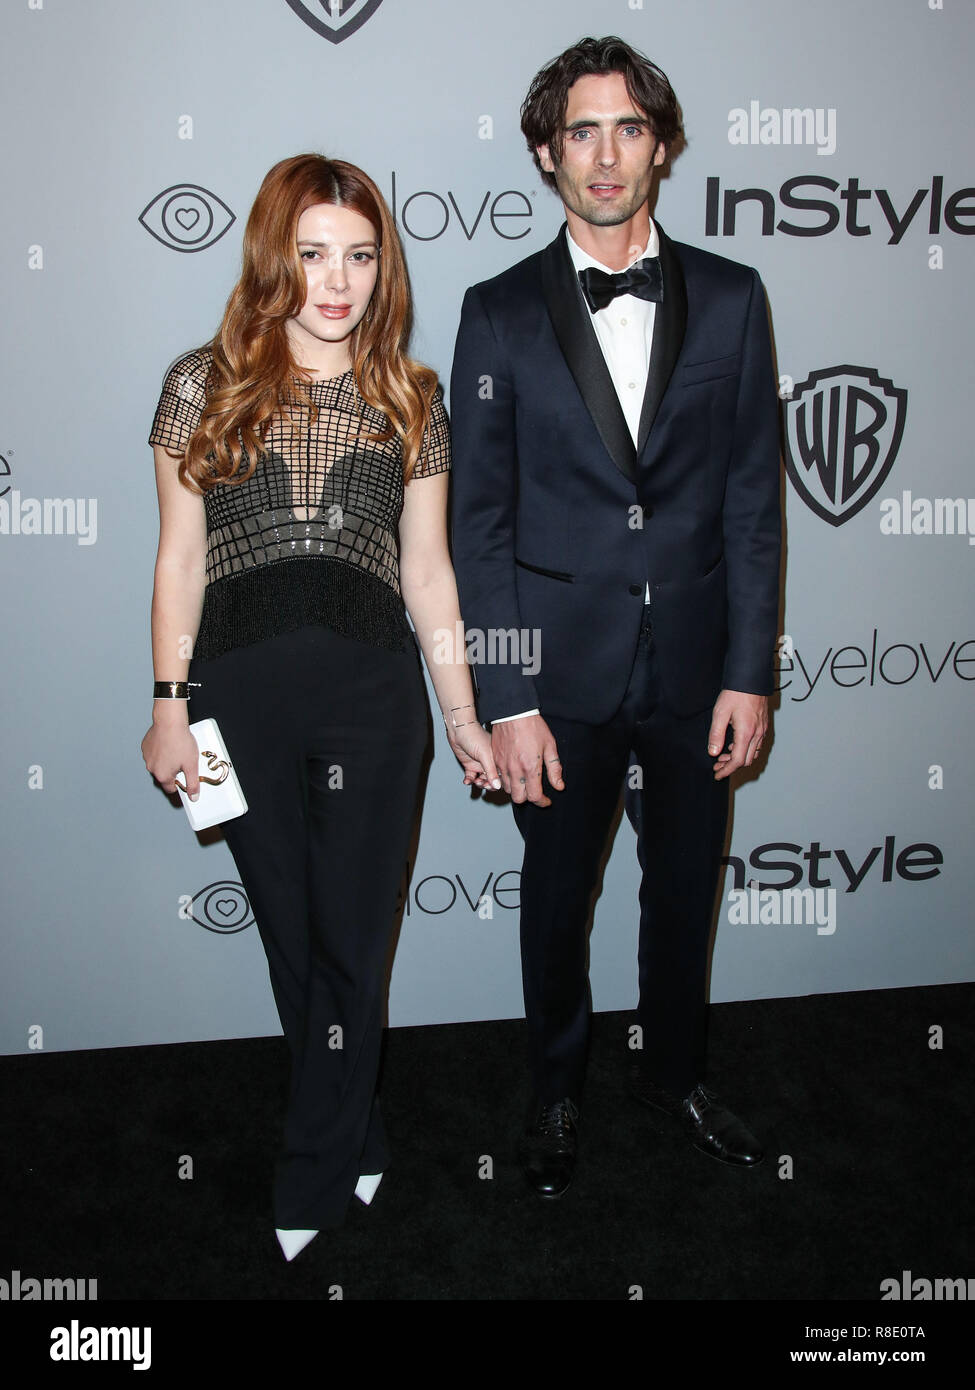 BEVERLY HILLS, LOS ANGELES, CA, USA - JANUARY 07: Elena Satine, Tyson Ritter at the 2018 InStyle And Warner Bros. Pictures Golden Globe Awards After Party held at The Beverly Hilton Hotel on January 7, 2018 in Beverly Hills, Los Angeles, California, United States. (Photo by Xavier Collin/Image Press Agency) Stock Photo